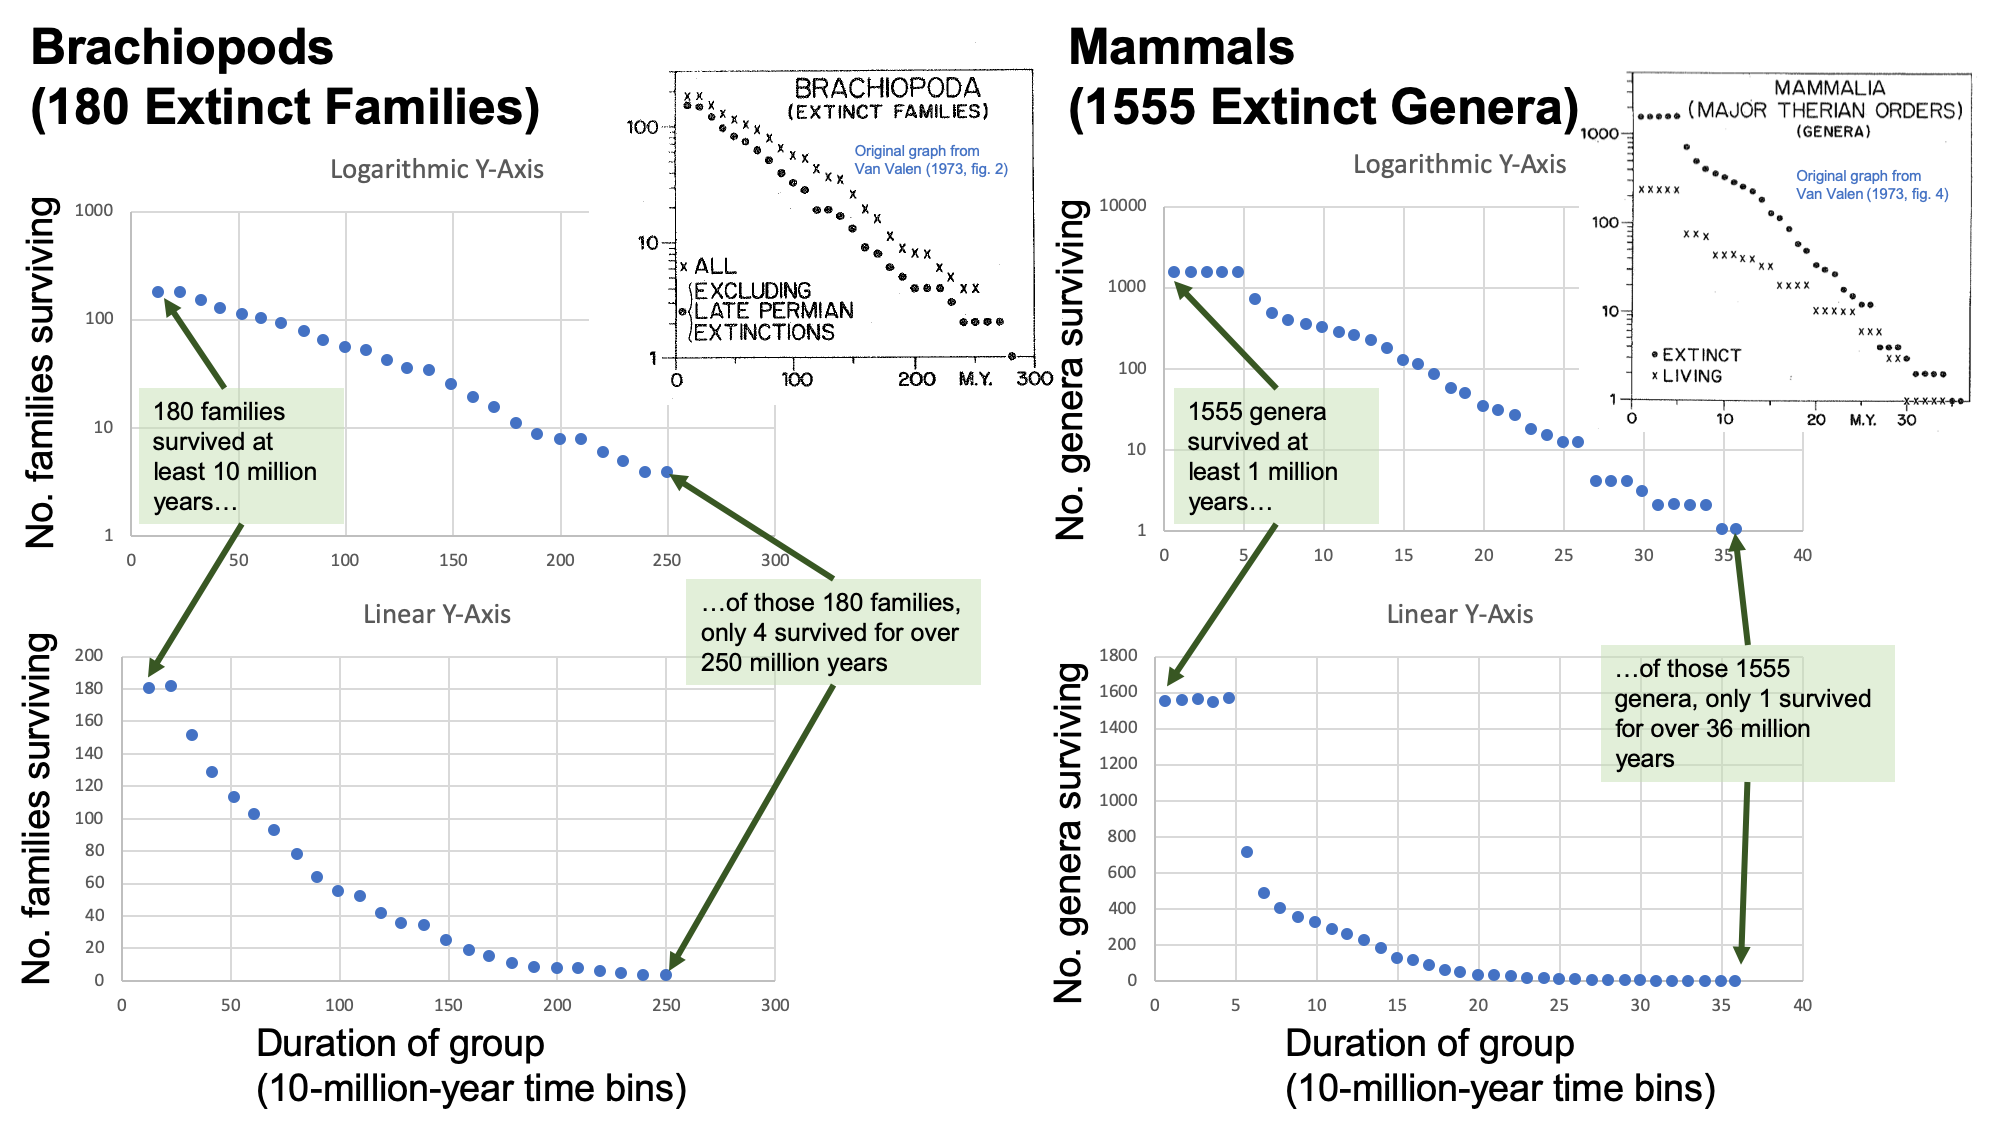 Image showing graphs that compare data derived from Van Valen's 1973 paper, including examples from extinct brachiopod families and extinct genera of mammals.